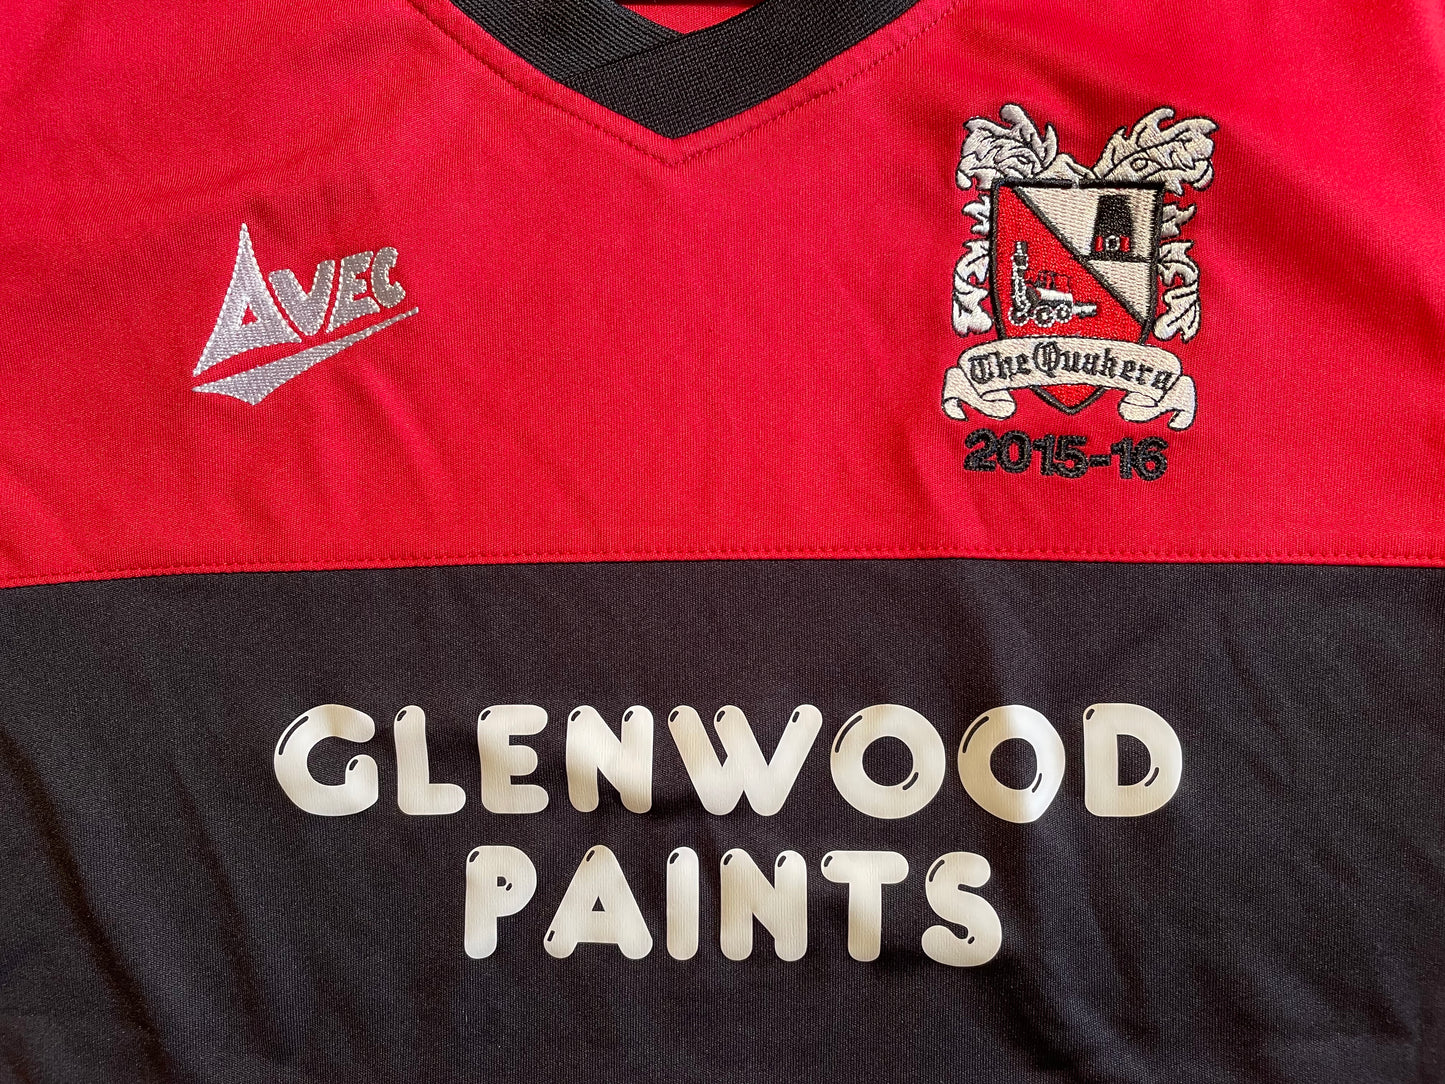 Darlington 2015 Away Shirt (very good) AdultsXXS/Youths. Height 20 inches